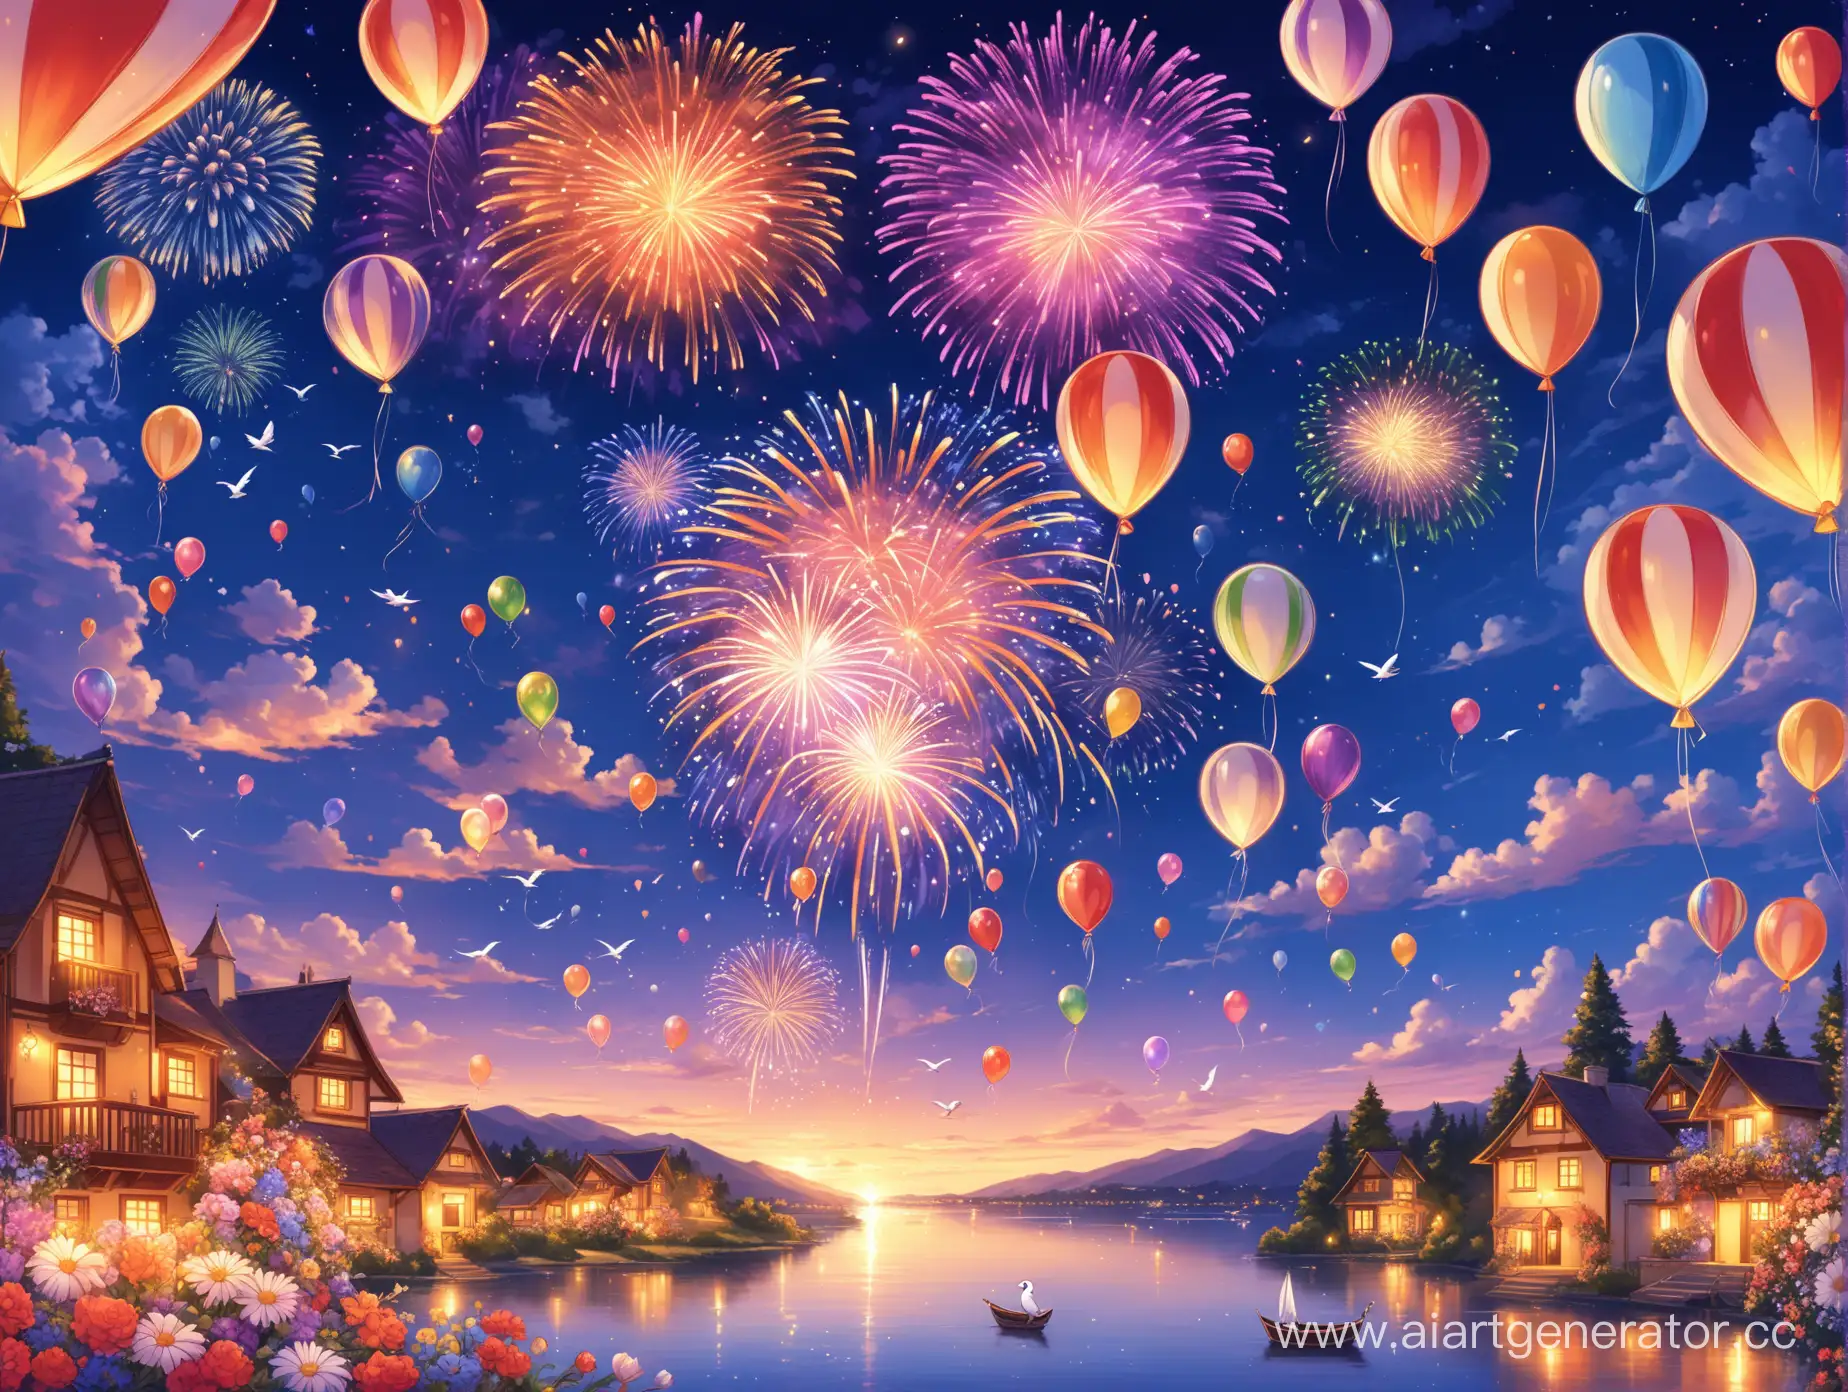 Magical-Holiday-Celebration-with-Balloons-Fireworks-and-Natures-Delights